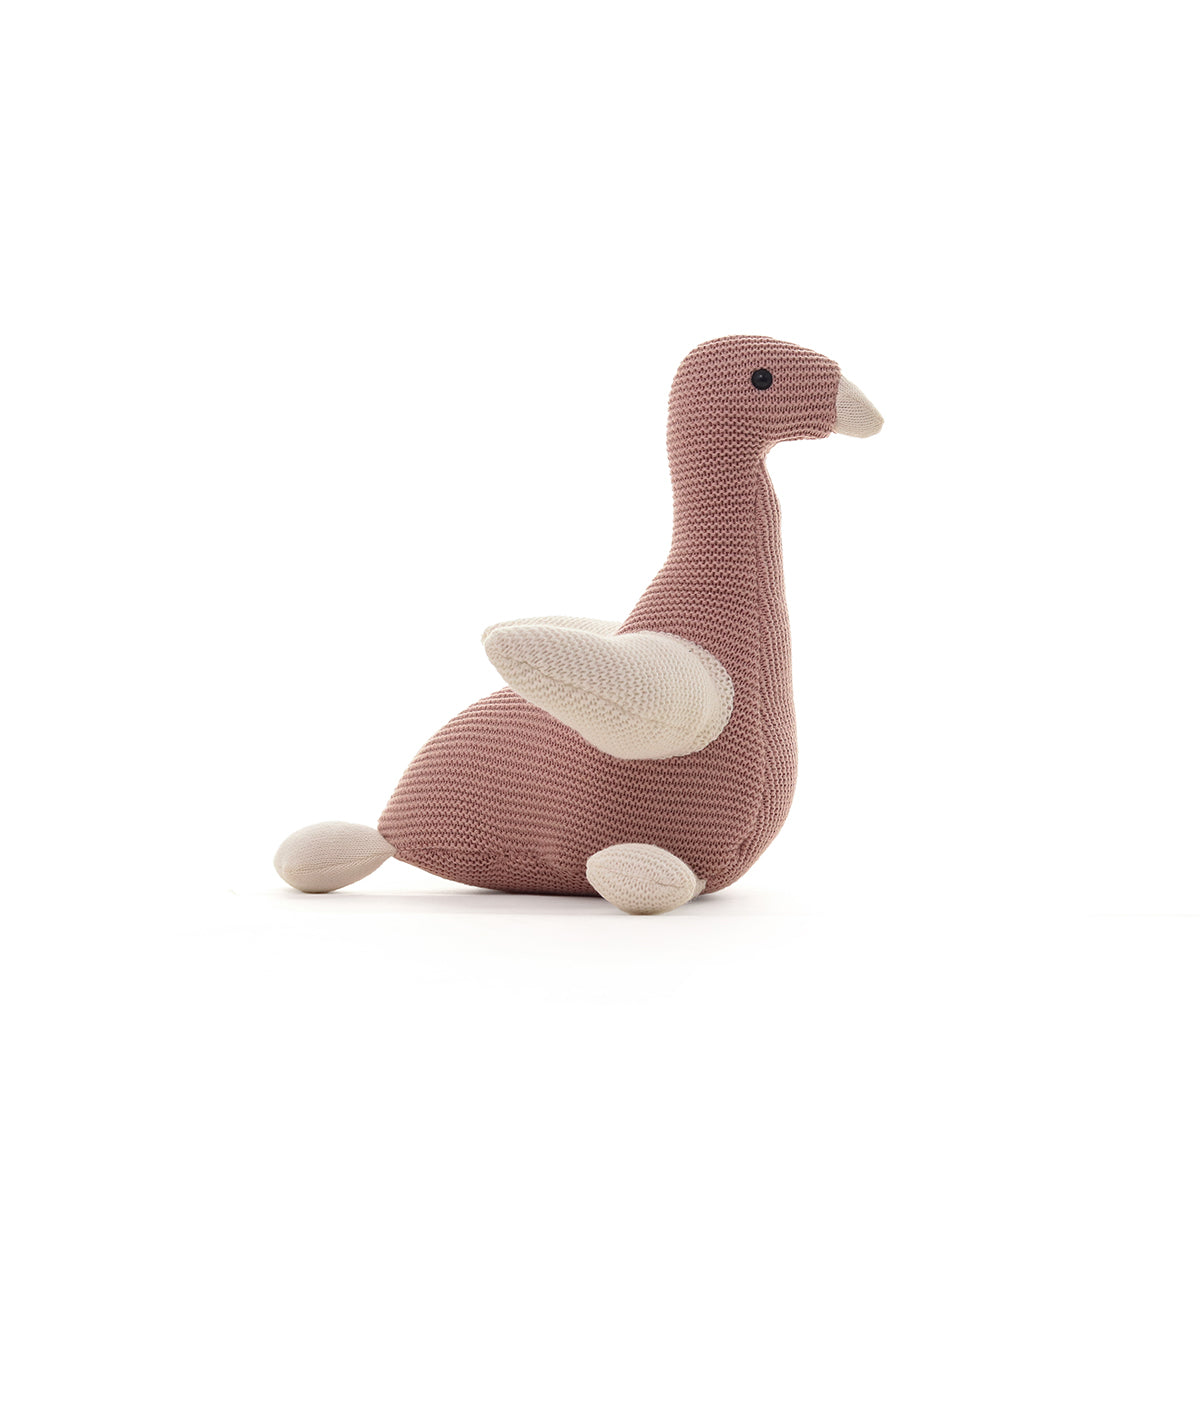 Chuckles Bird Cotton Knitted Stuffed Soft Toy (Pale Pink & Ivory)